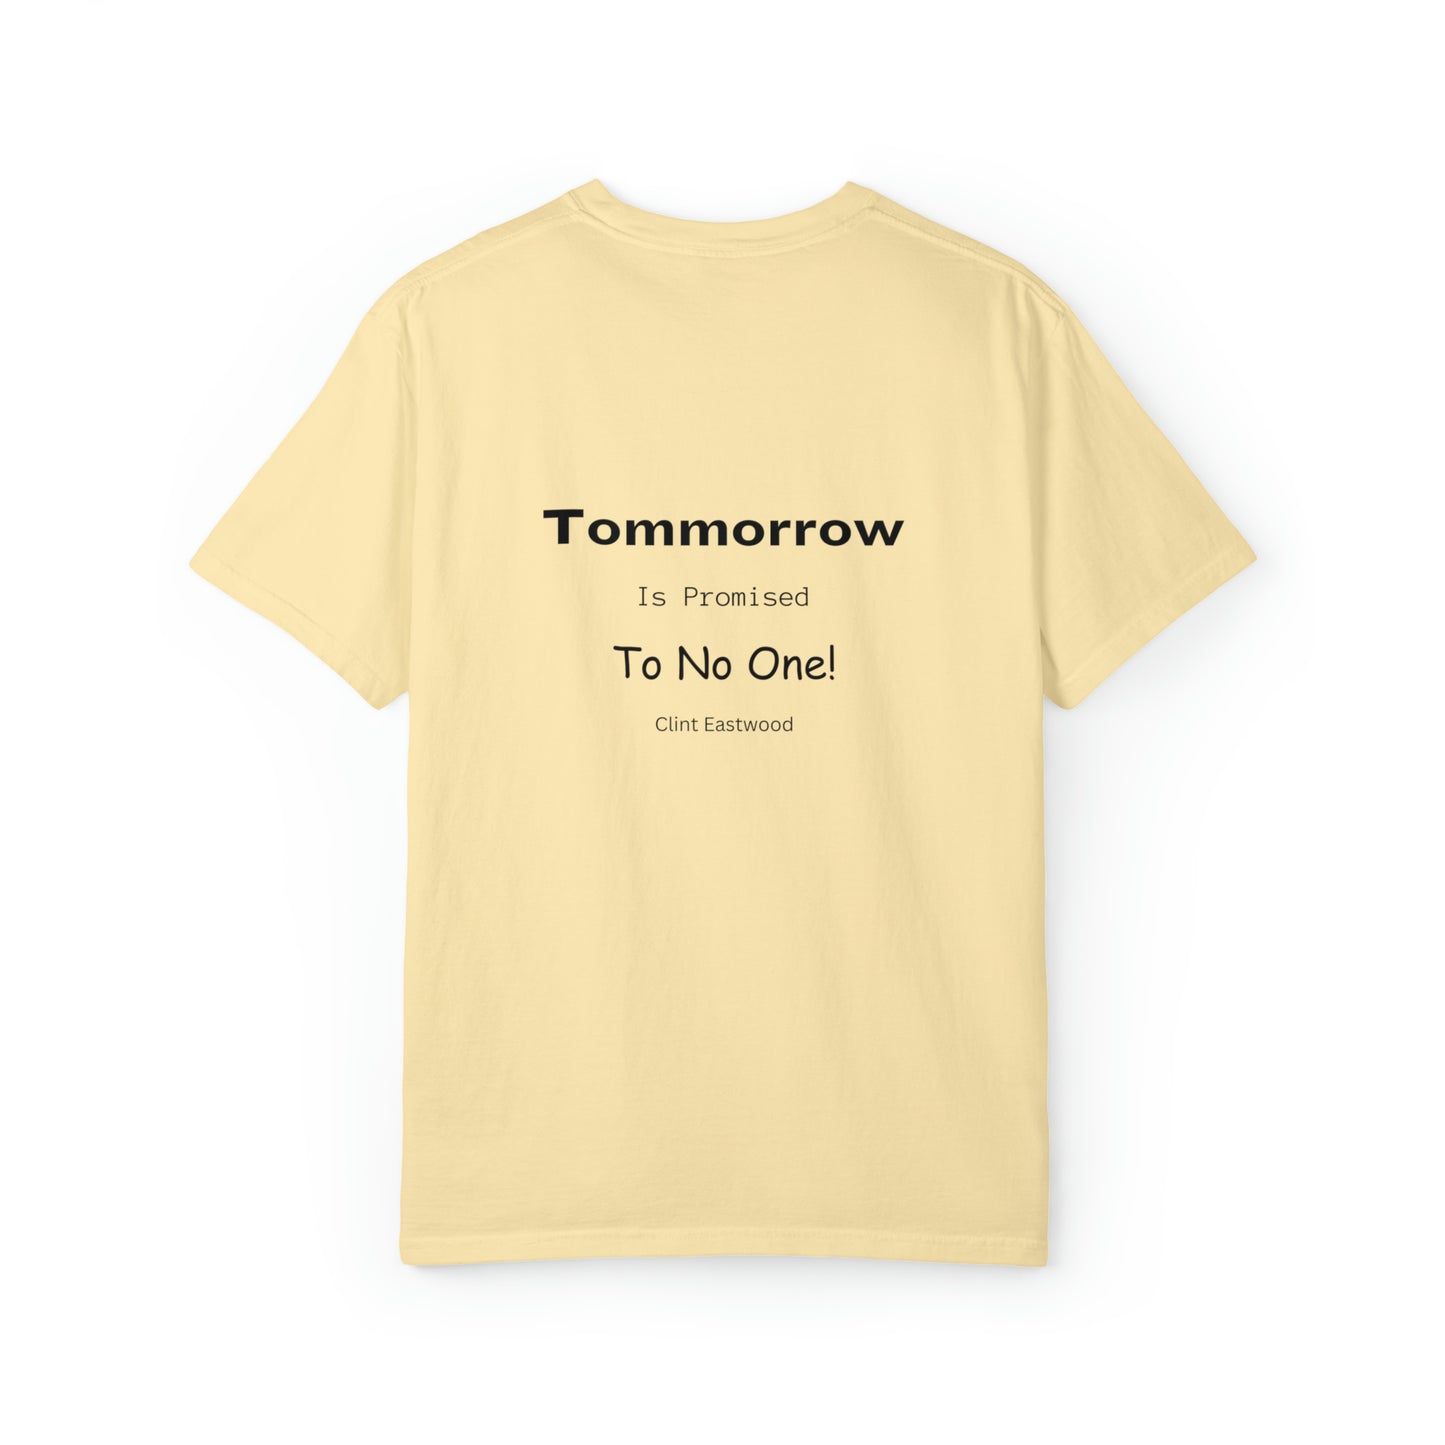 "Tomorrow is Promised to No One!" Unisex Garment-Dyed T-shirt